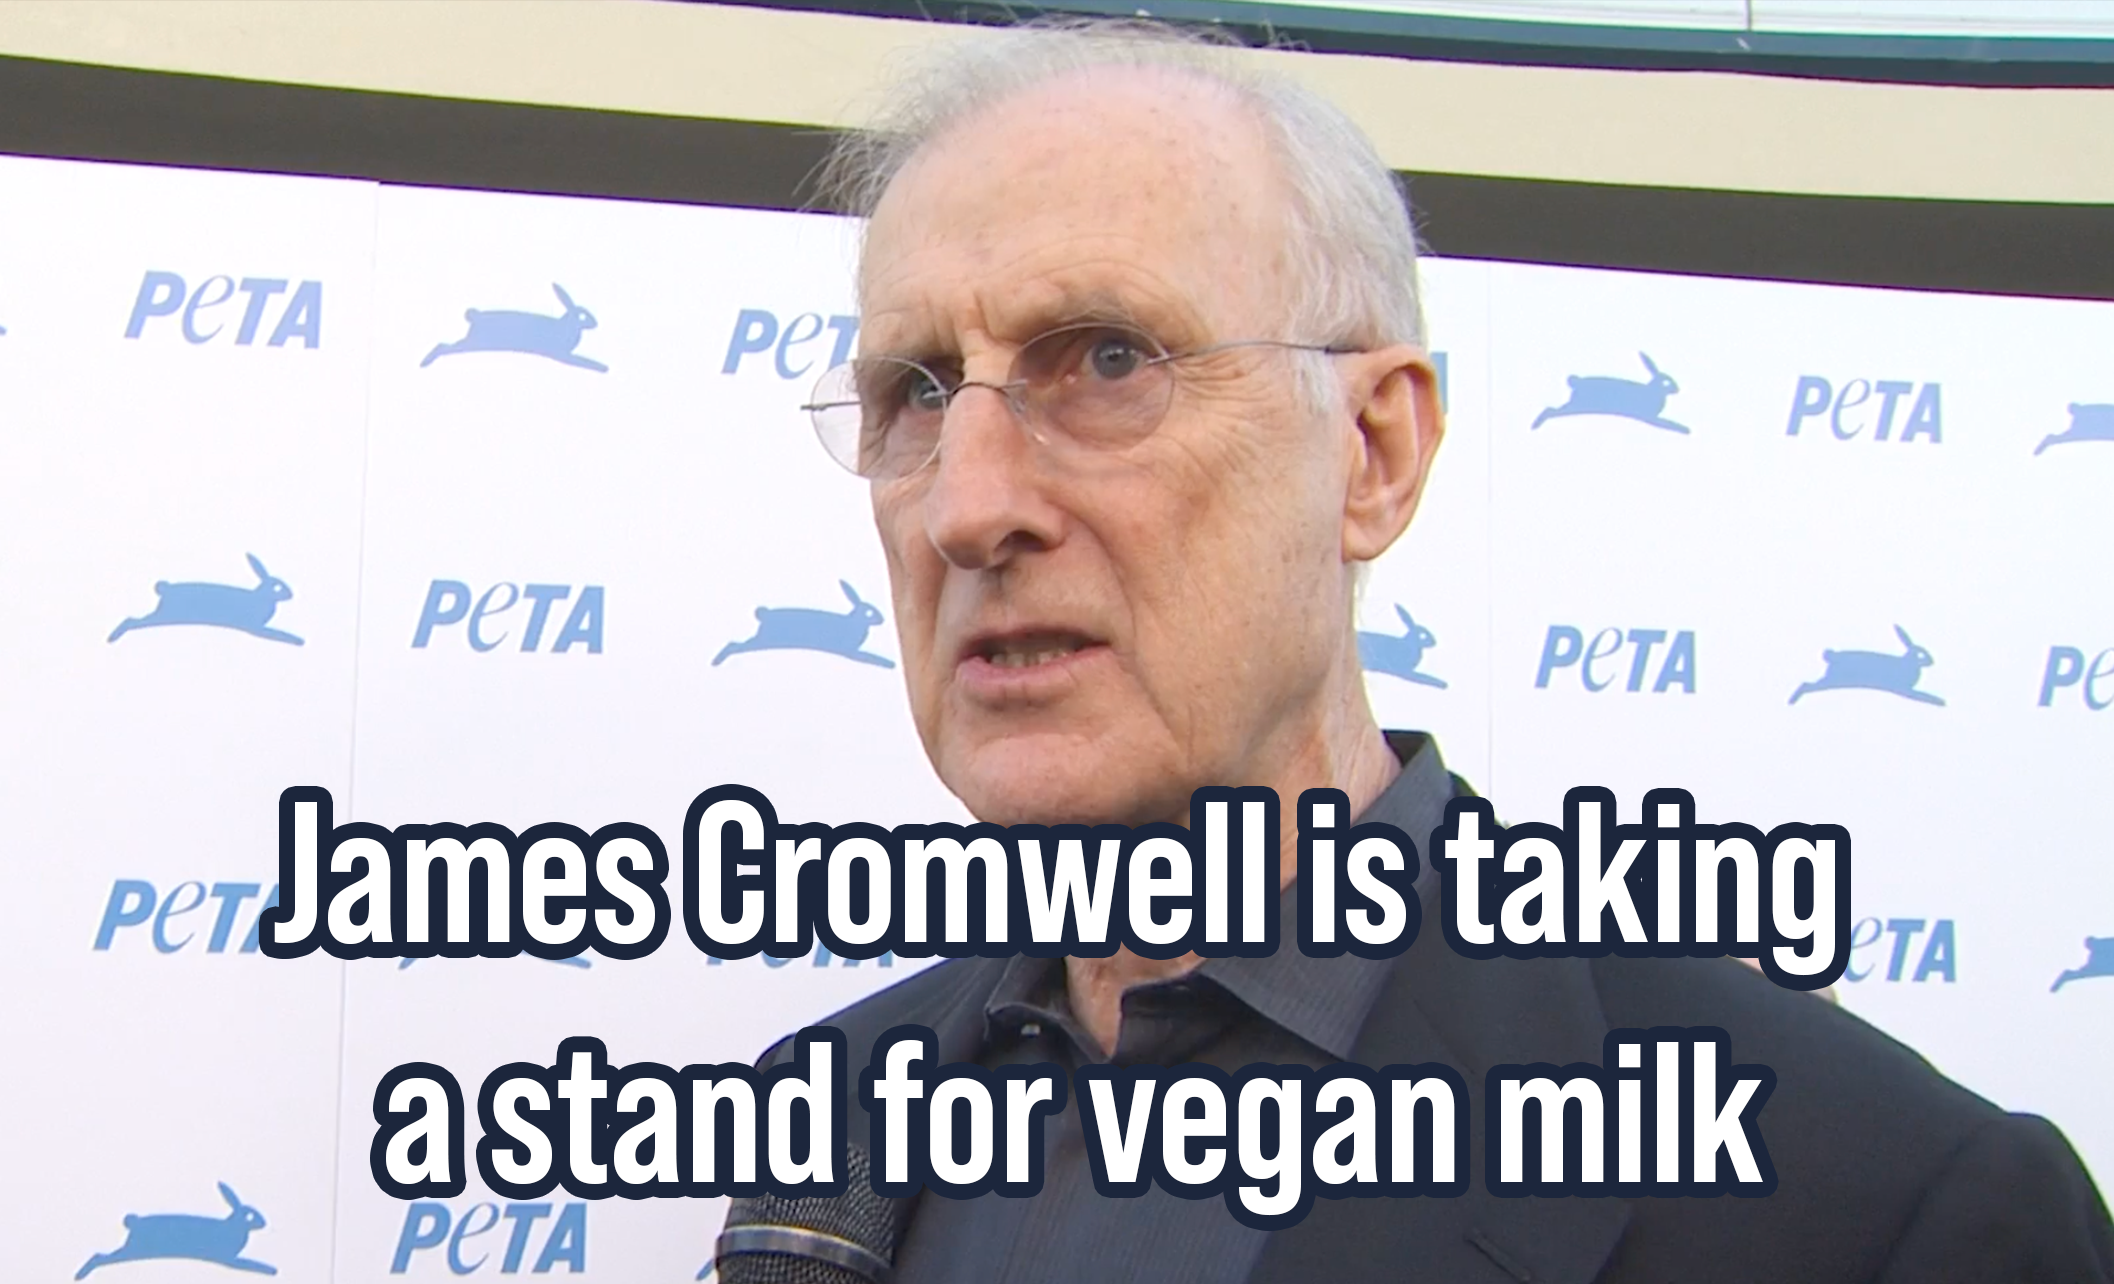 James Cromwell is taking a stand for vegan milk